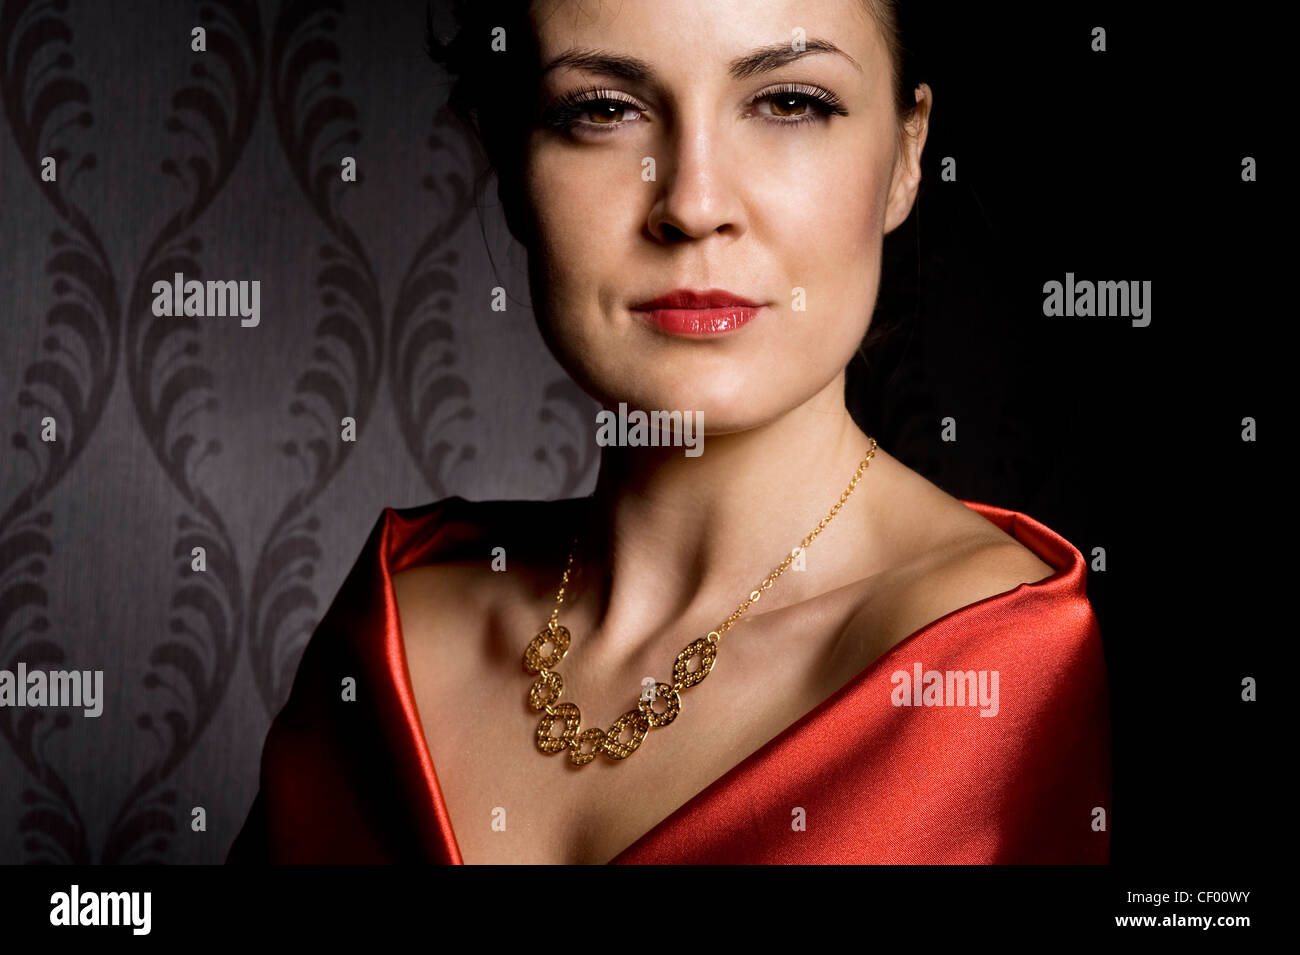 woman wearing golden necklace over wallpaper background Stock Photo